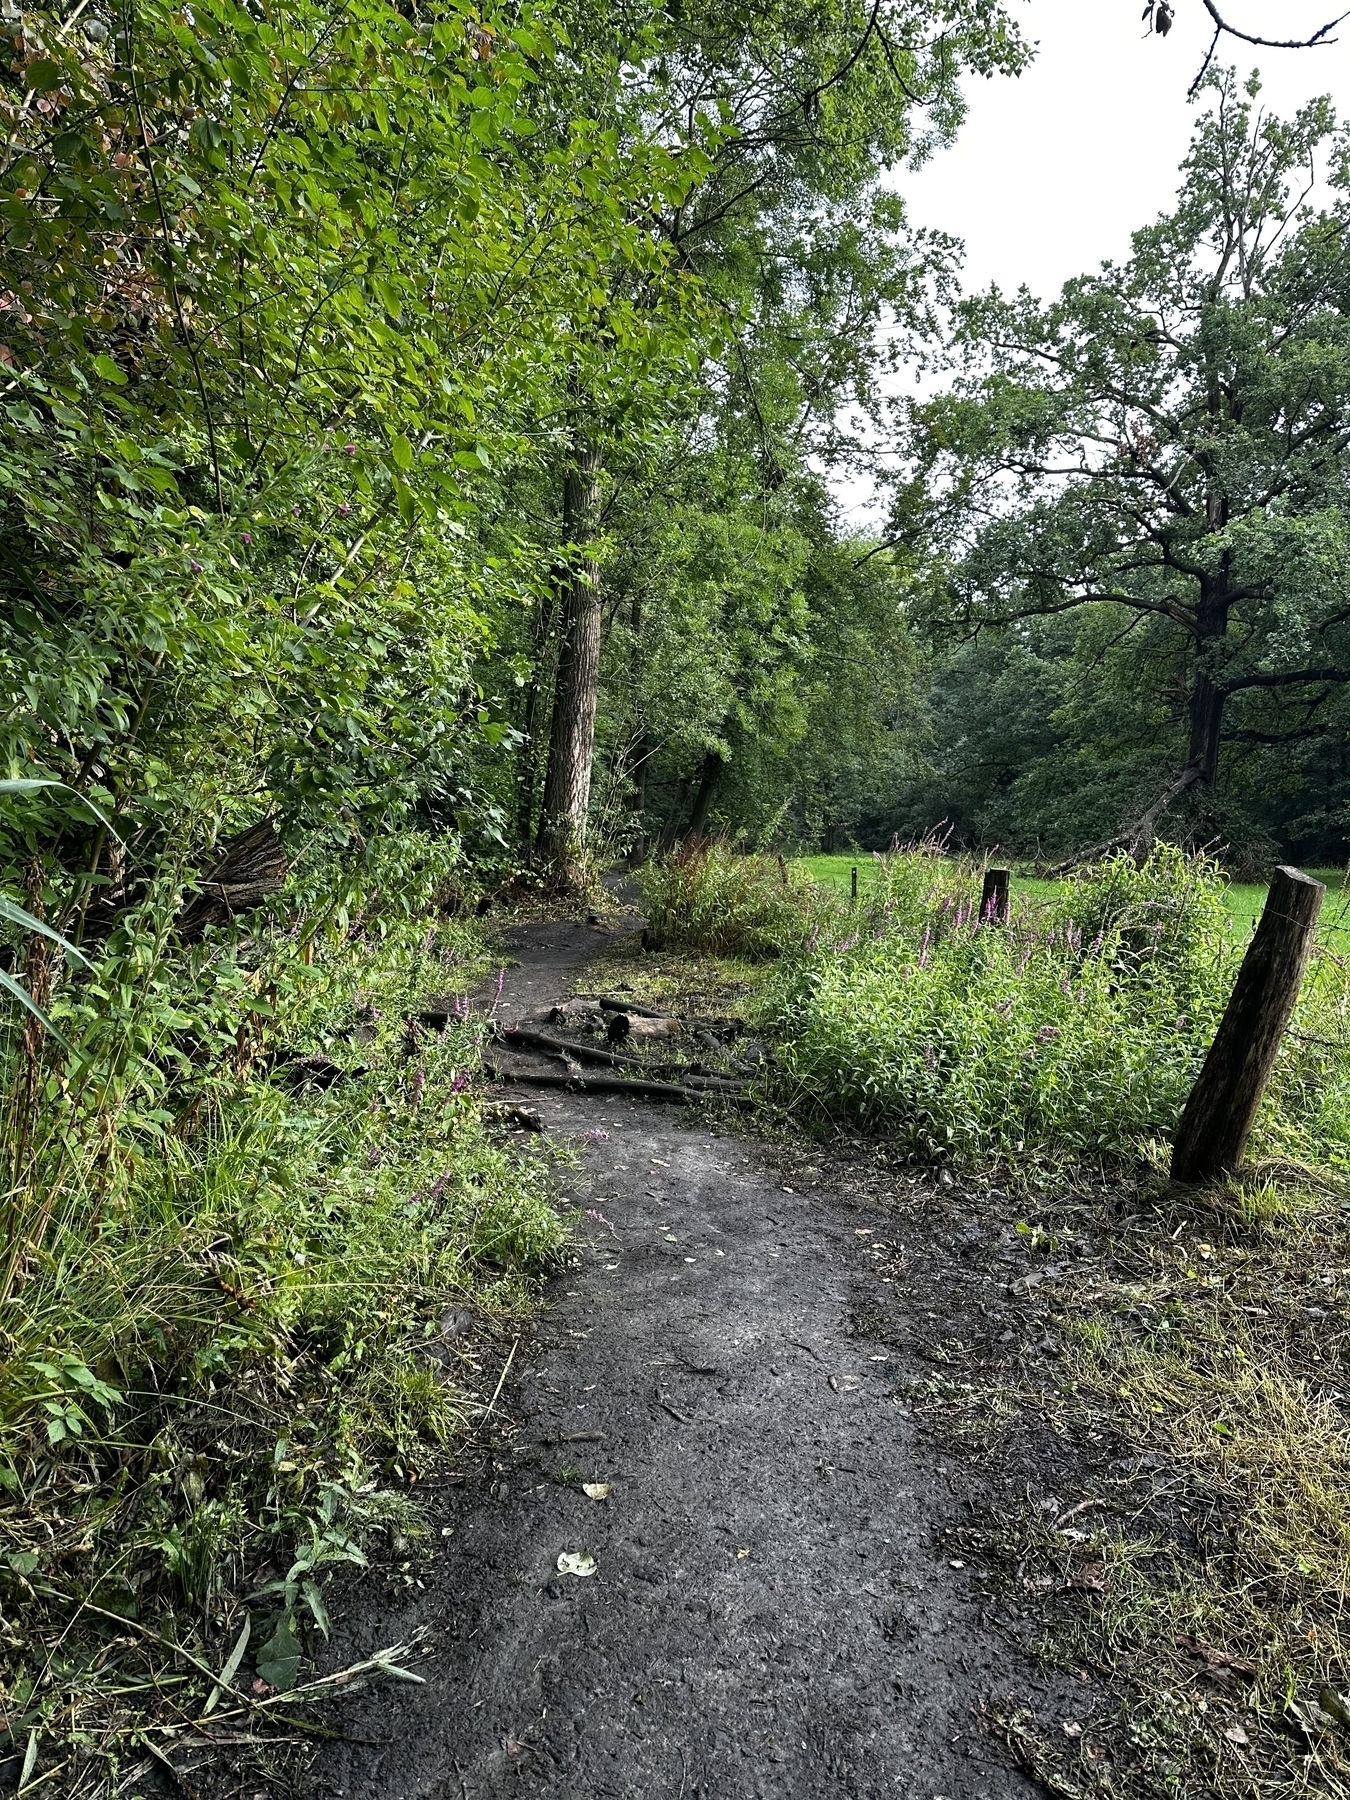 A winding unpaved road in the green, forest on the left, meadow on the right.